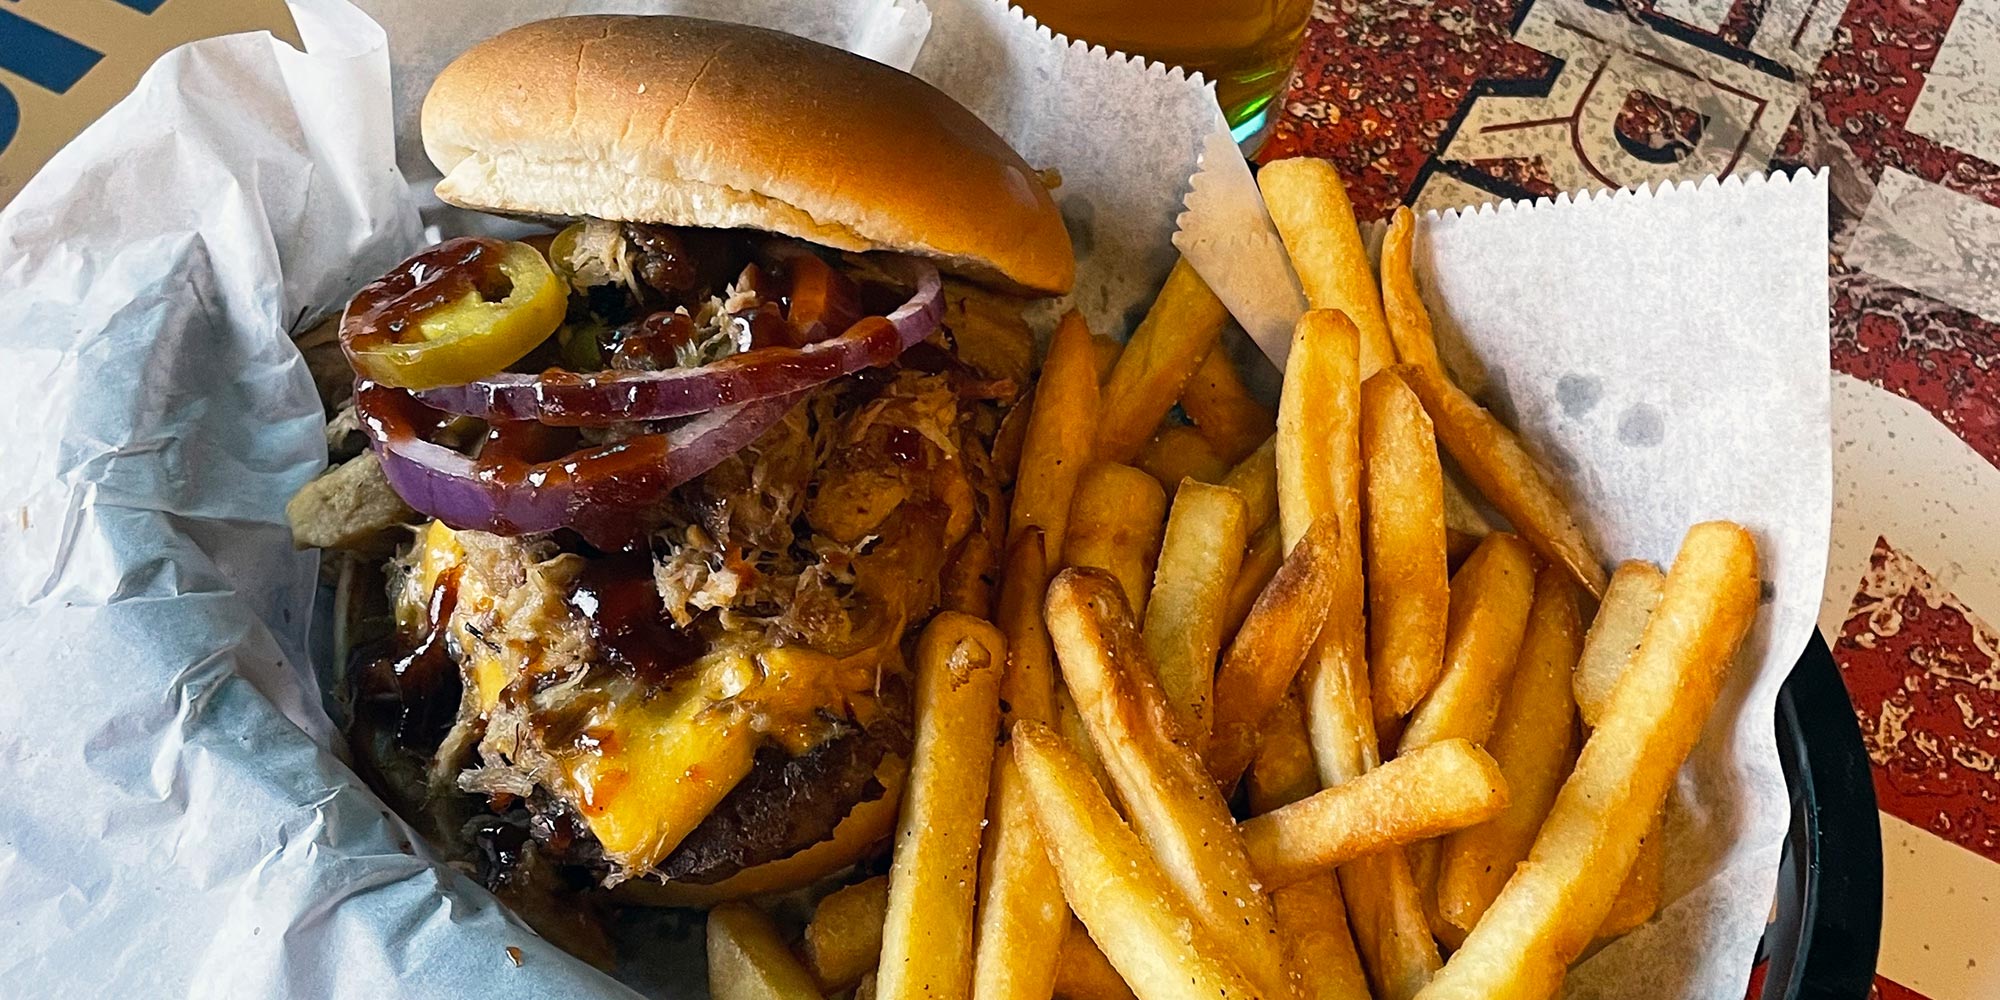 Empire Street Burger with Fries